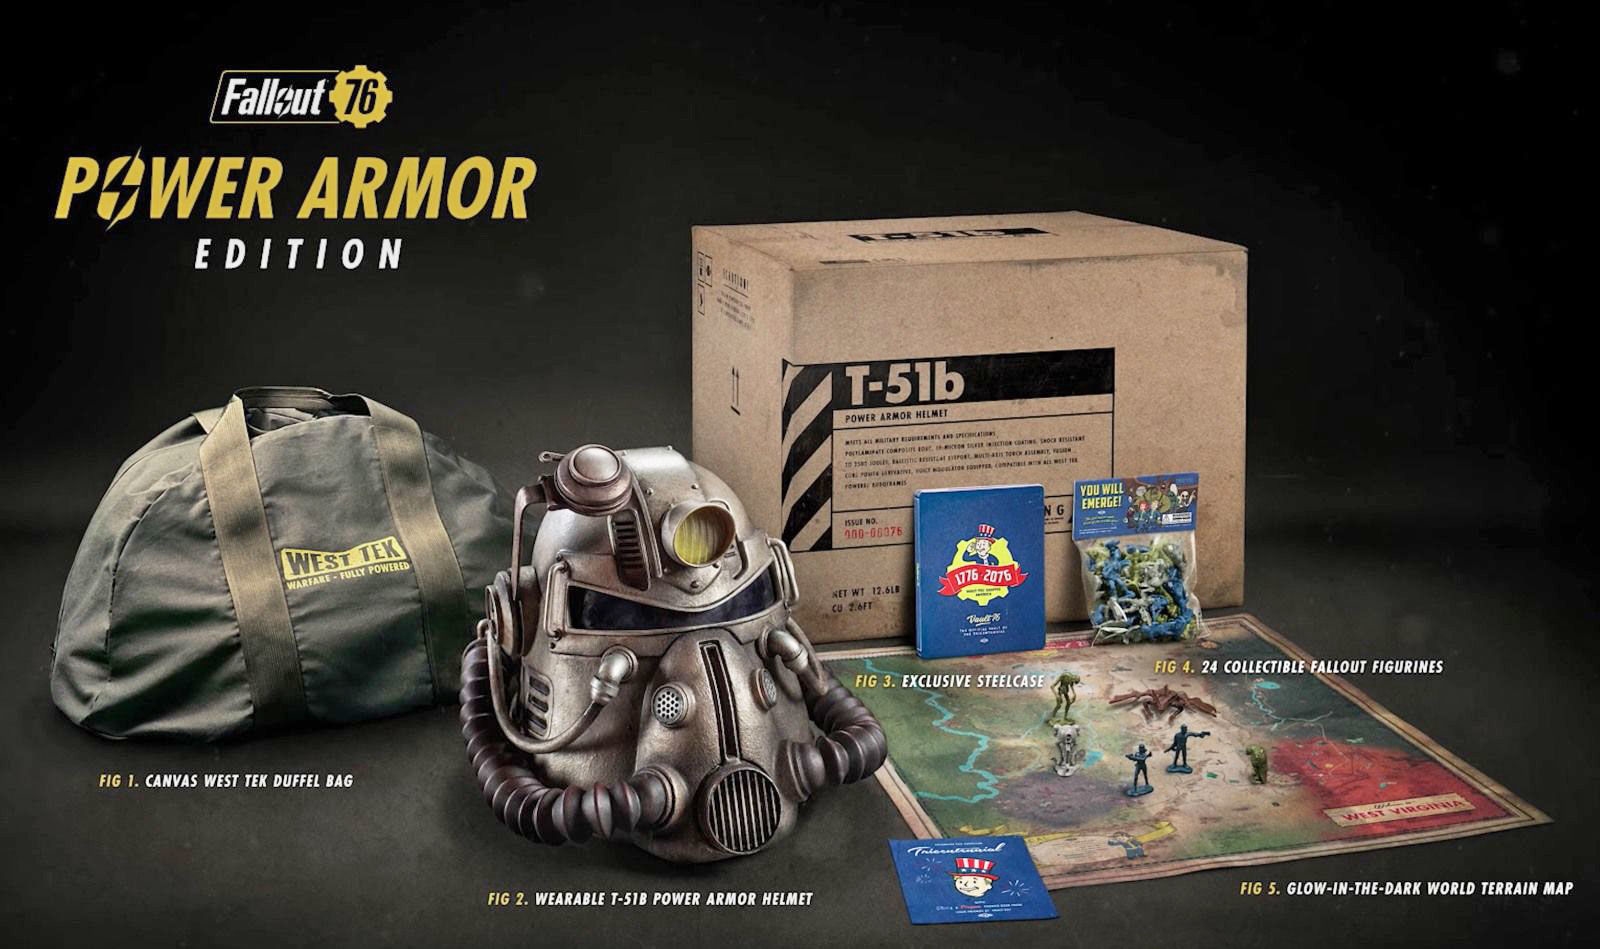 'Fallout 76' Power Armor Edition buyers will get their canvas bags | DeviceDaily.com